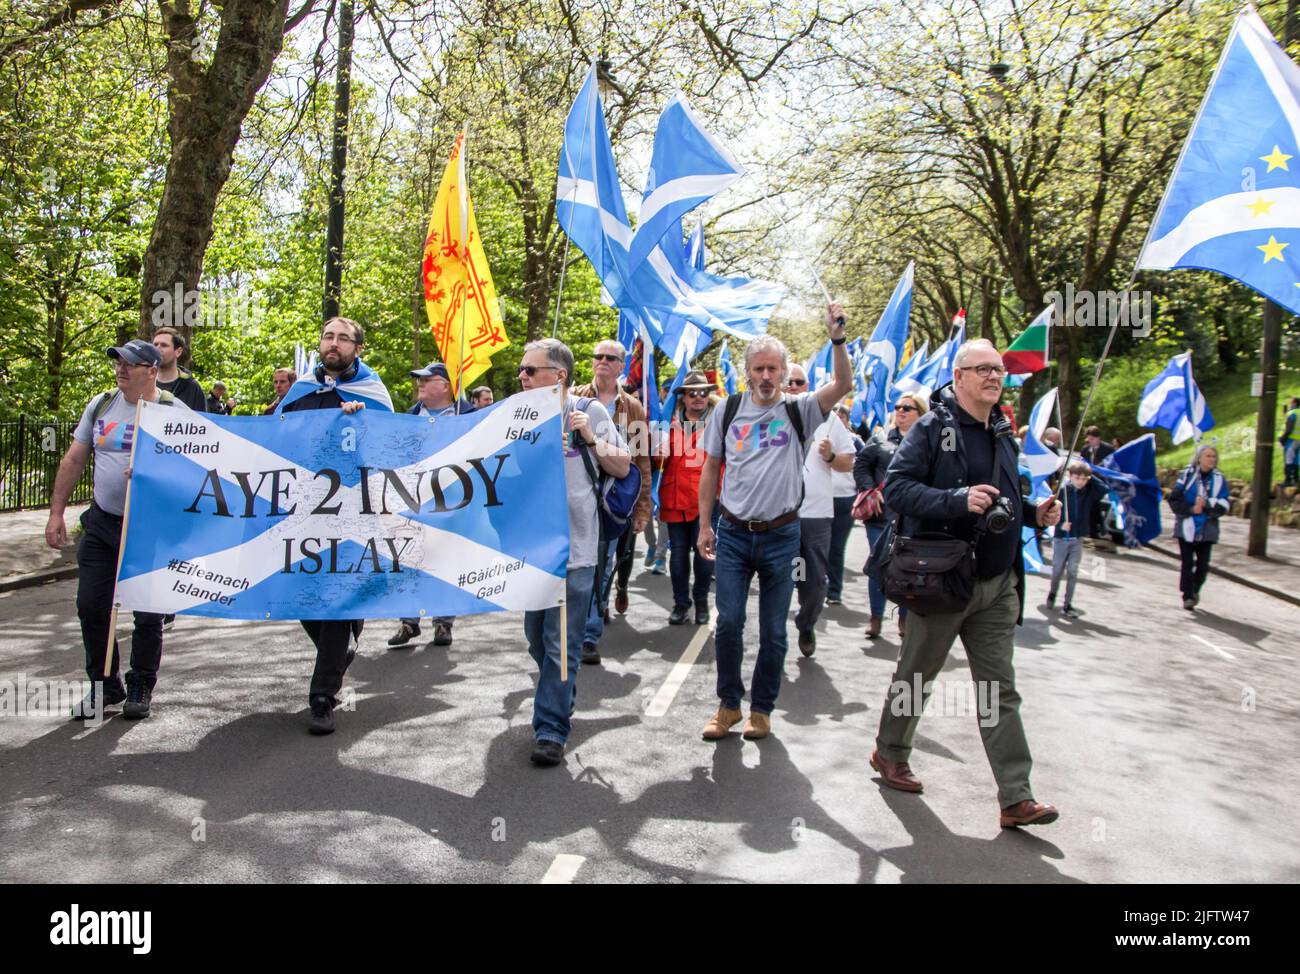 March for Indyref 2, People with Scottish Flags and Banner 'Aye 2Indy Islay' Stock Photo